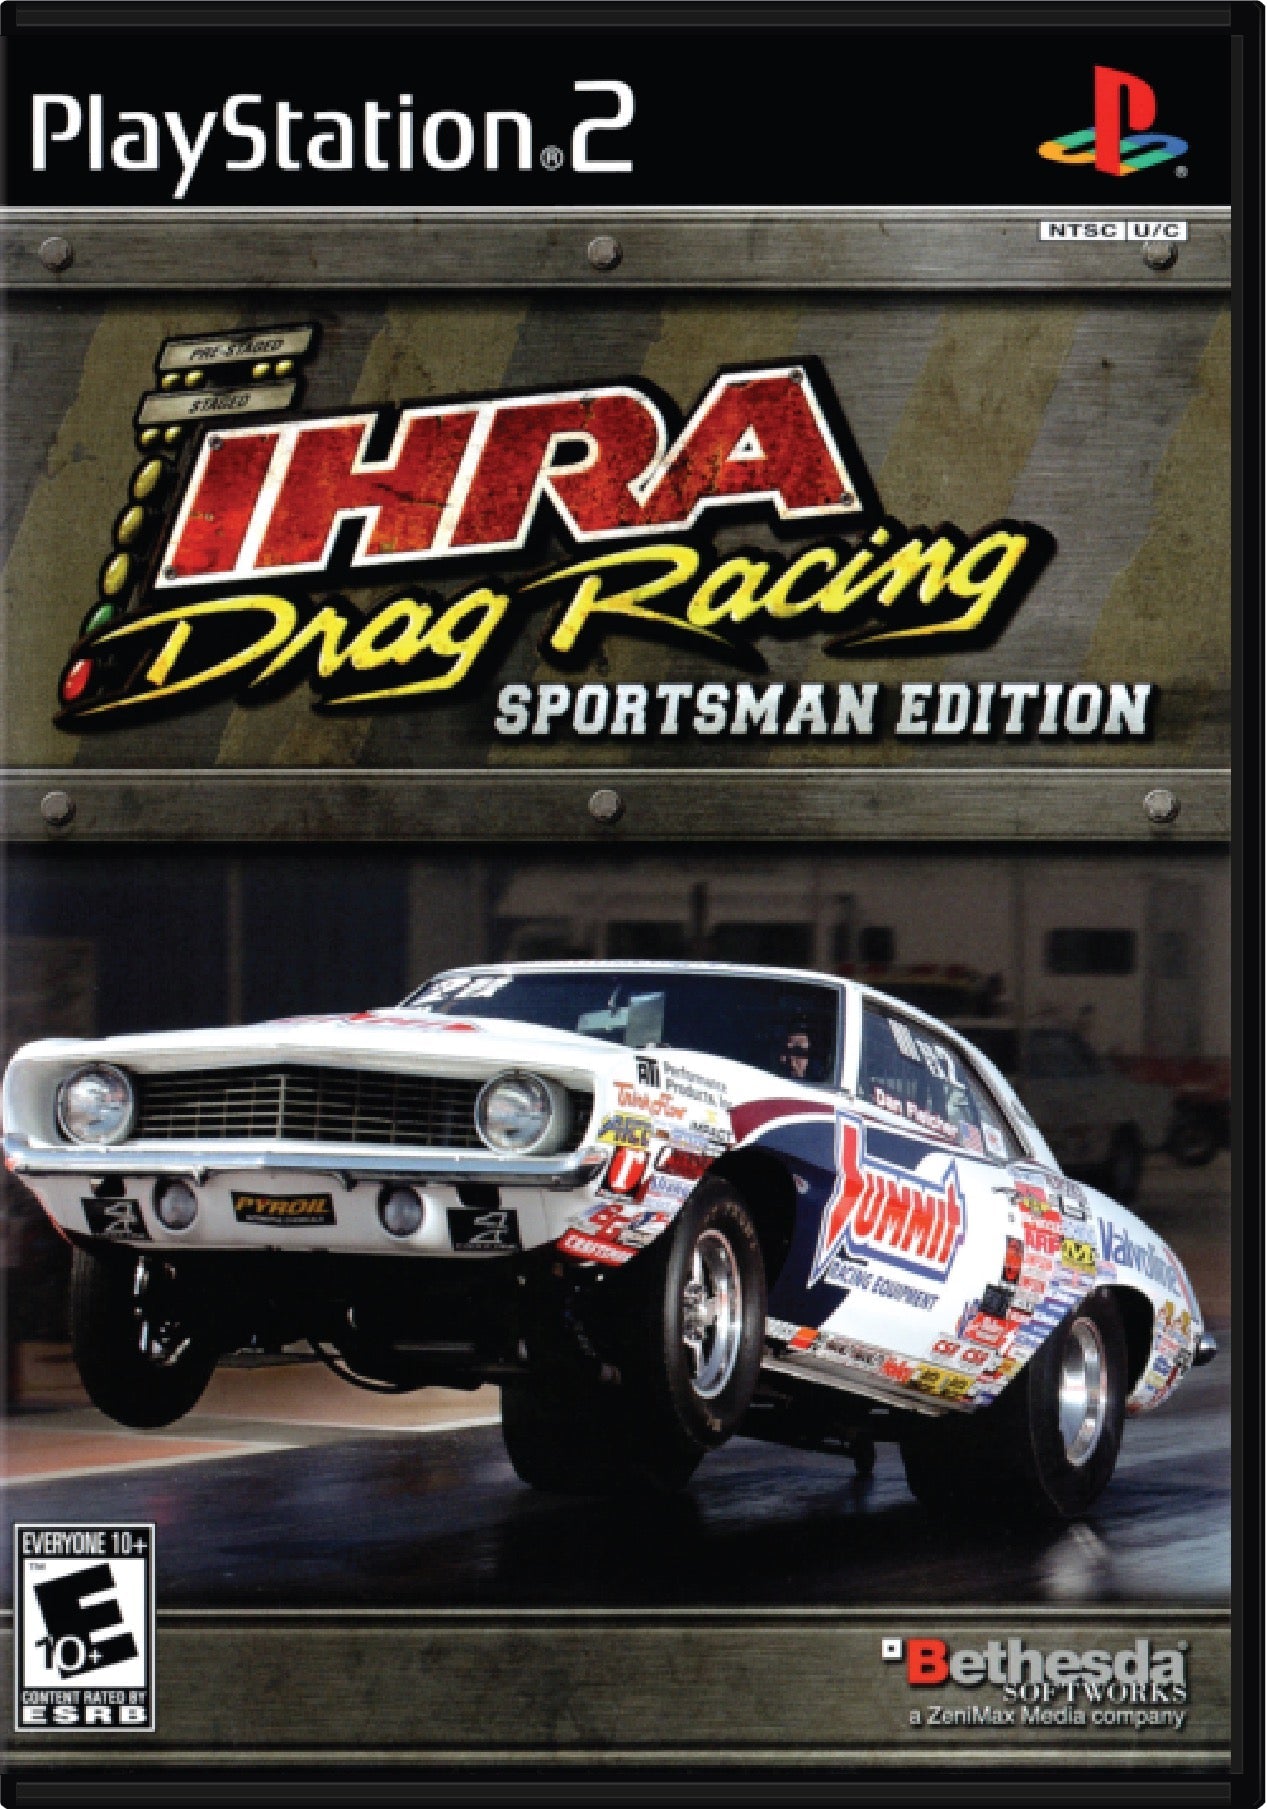 IHRA Drag Racing Sportsman Edition Cover Art and Product Photo